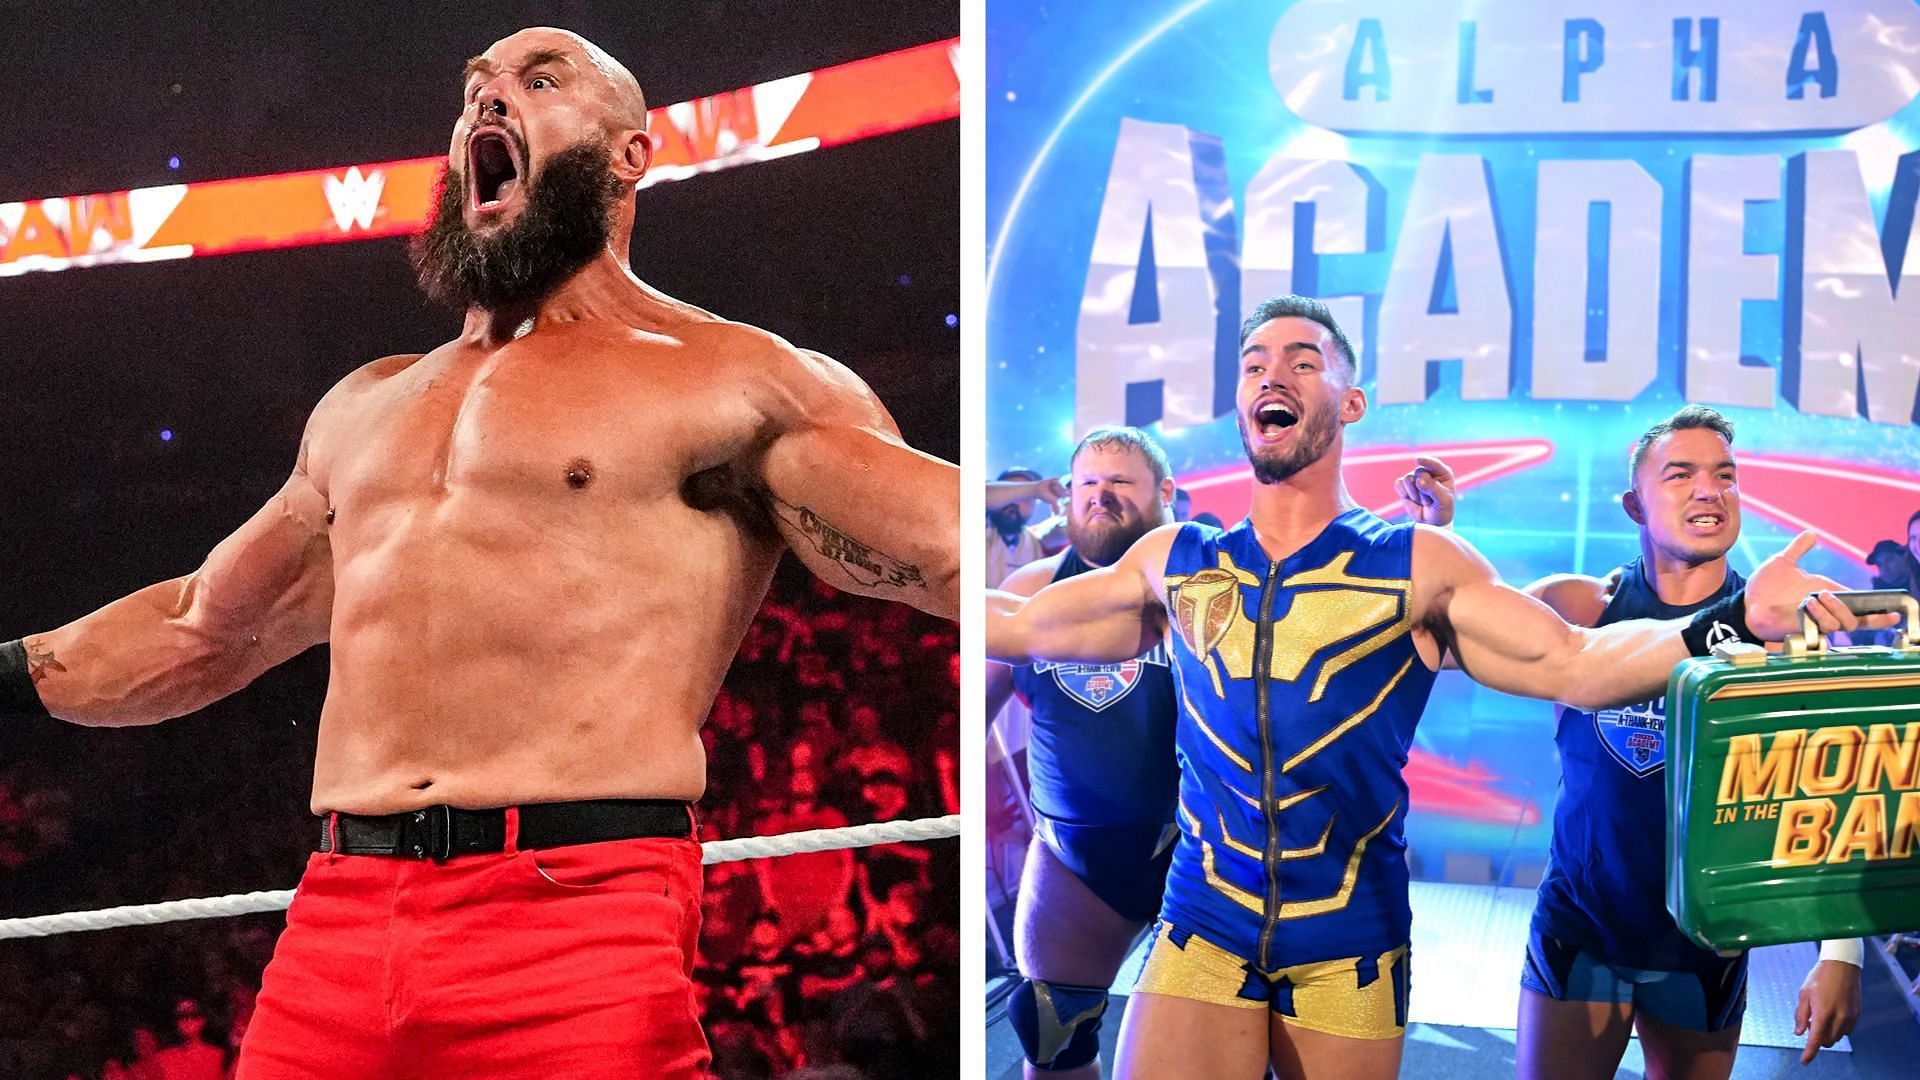 Braun Strowman and Chad Gable are set to go one-on-one on WWE RAW